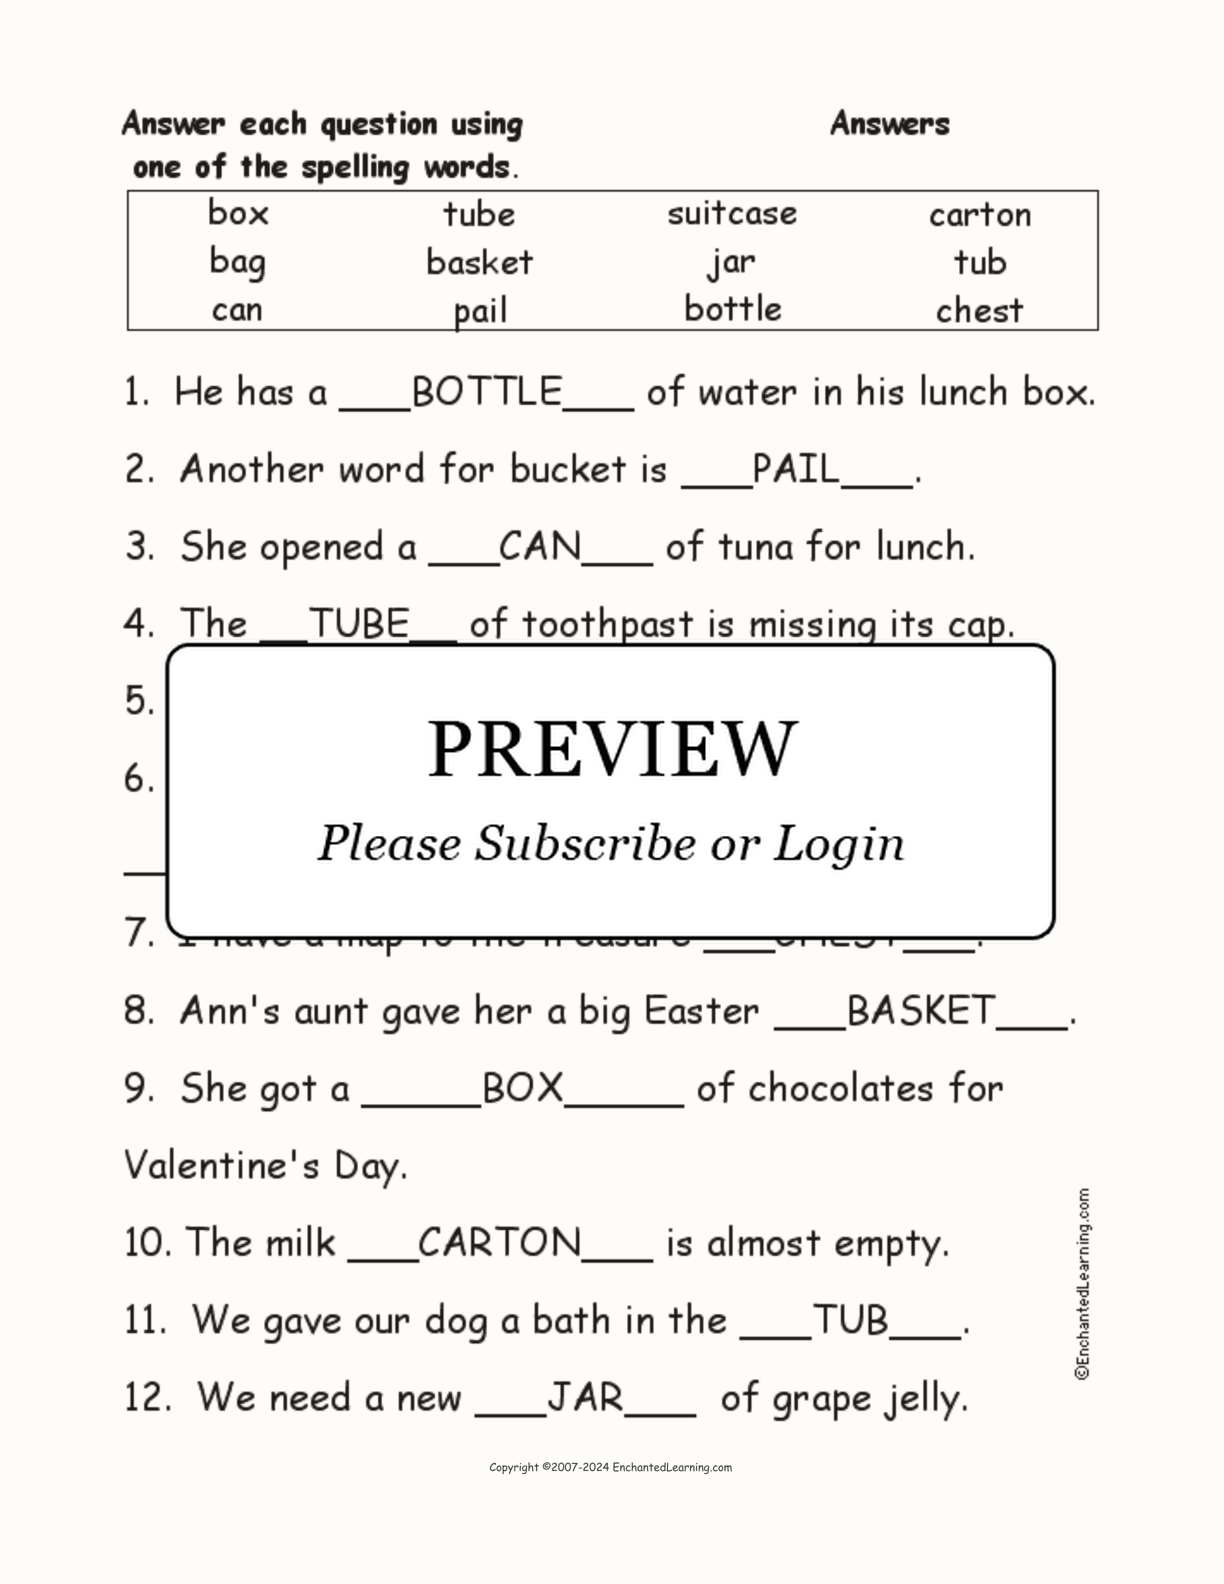 Container Spelling Word Questions interactive worksheet page 2